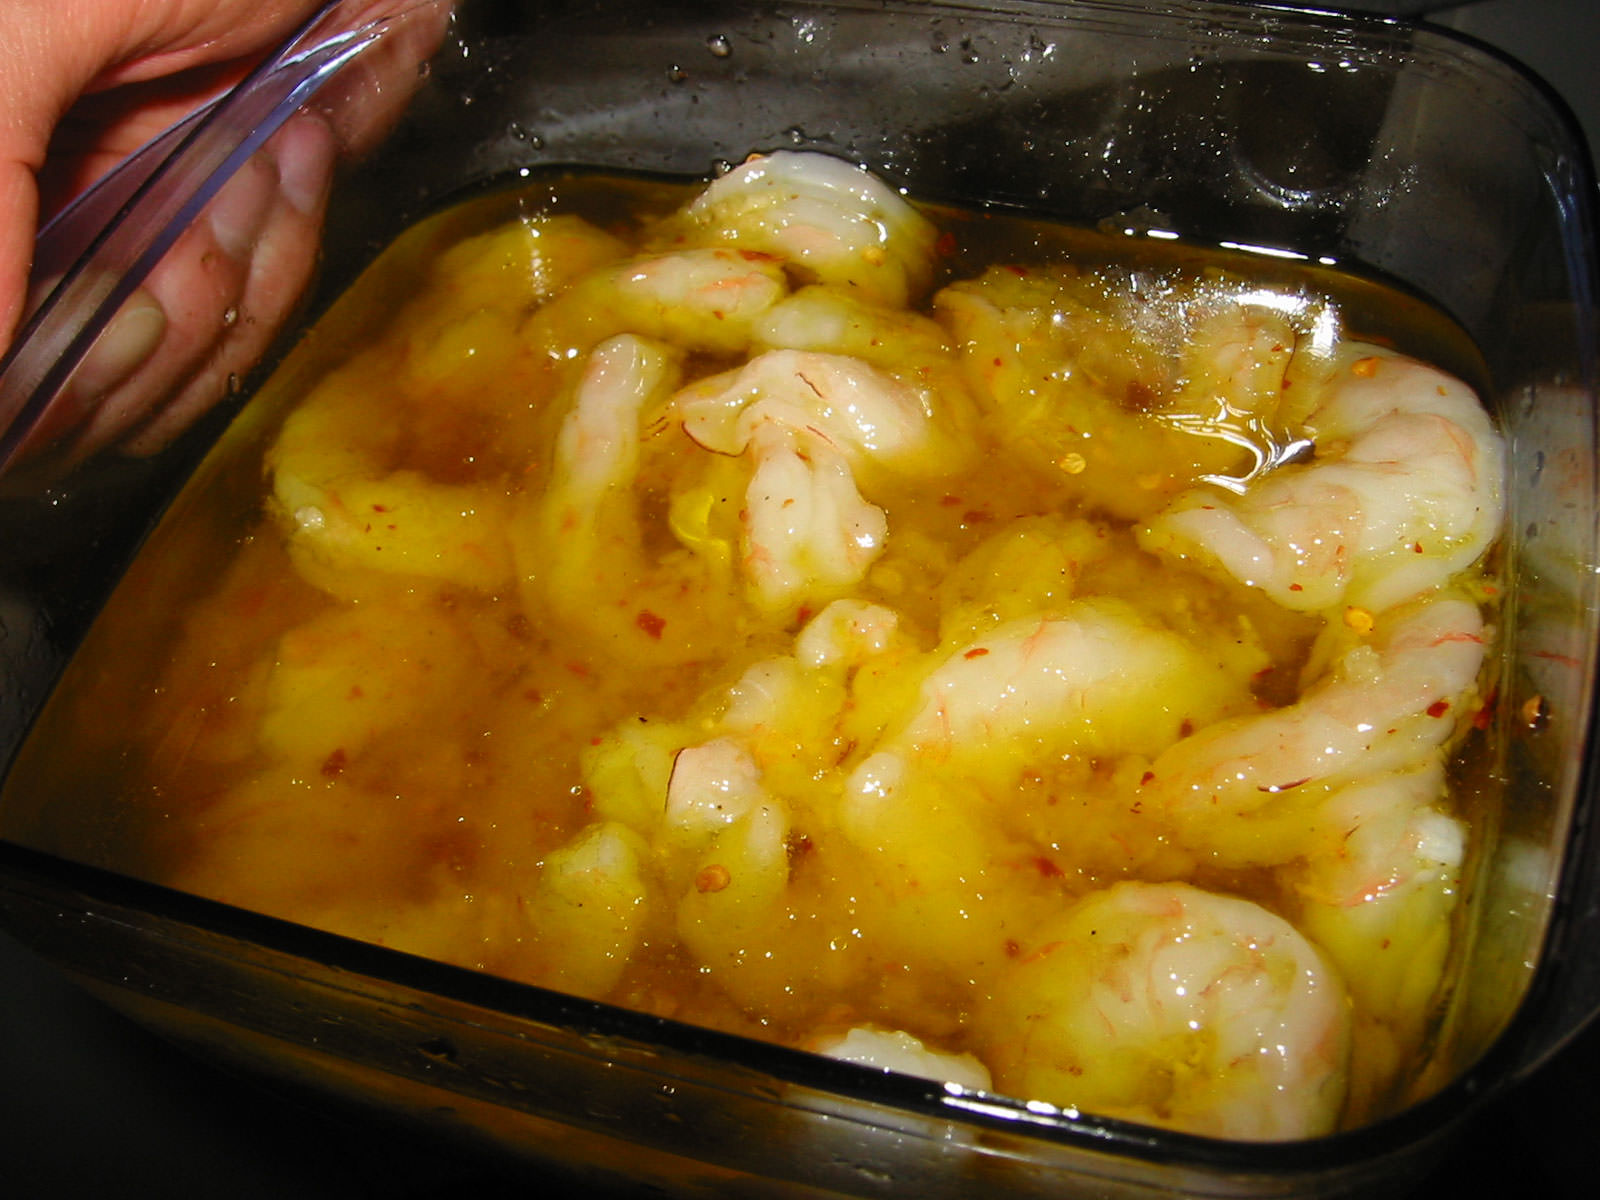 Uncooked prawns in oil and garlic